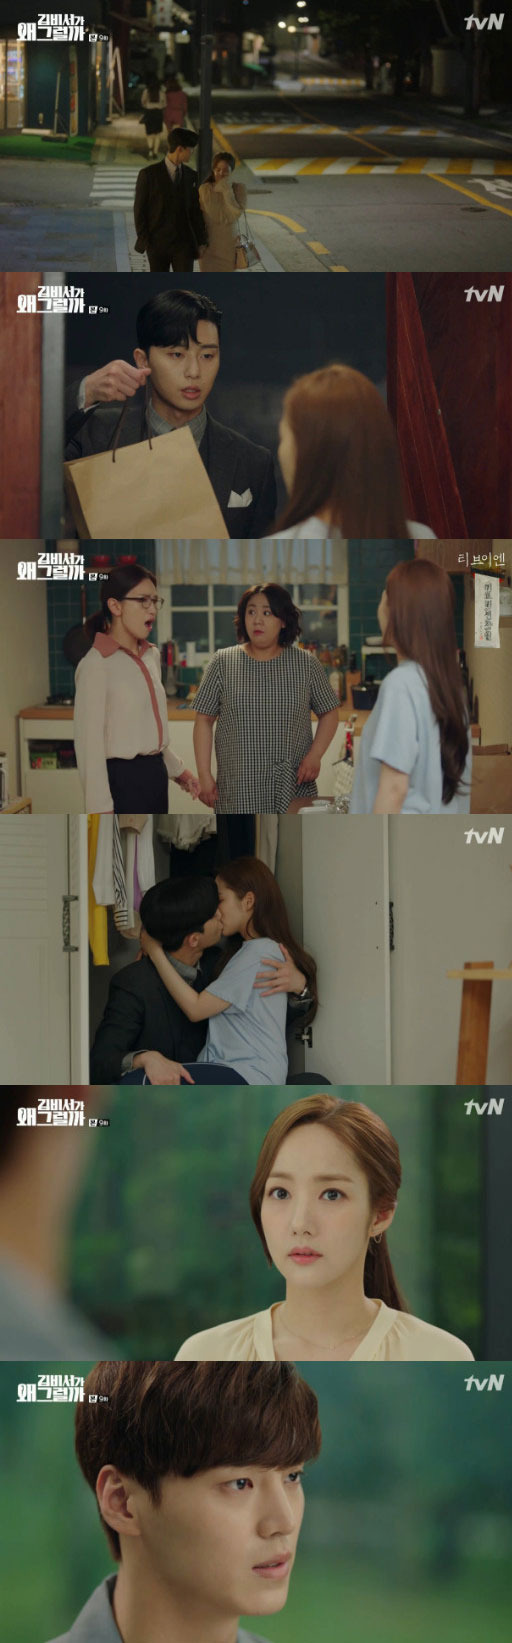 Seoul = = Park Min-young and Park Seo-joon started a chicken-snatched relationship.On the 4th, TVN Why Secretary Kim Will Do It, Lee Yeongjun (Park Seo-joon) and Kim Mi-so (Park Min-young) were shown to finish the thumb and start to love.Lee Yeongjun and Kim Mi-so confirmed their love for each other with a kiss.Lee Yeongjun proposed to Kim Mi-so to check his love and marry him again, and Kim Mi-so laughed, saying, I have not been able to date a time, but I am too hasty to propose.Lee Yeongjun showed his affection for Kim Mi-so and confirmed his appearance with his mouth raised.I also had a hard time in a long time nightmare, but after confirming my love with a smile, I was able to sleep deeply.Kim Mi-so could not help but think that Lee Yeongjun was a brother in the memories of being kidnapped with him in the past.Lee Yeongjun lied, If you are a brother who is waiting for a favorite man, you will be ignorant, but that brother is not me.Kim Mi-so said that even if Lee Yeongjun was not his brother, his heart that liked him remained the same.Lee Yeongjun and Kim Mi-so went on their first date, but the date was ordered by Kim Mi-so, the secretary, to the date and cake.The chef said, I know someone is a secretary, not a lover, and embarrassed the two people by saying that they were pouring water and acting like a secretary.In the end, Lee Yeongjun said that even if he is a bad boss, he can not be a bad lover.Lee Yeongjun copied himself and prepared refreshments, and the staff of the annex were anxious about whether it was intended to make a layoff, and Kim, who knew Lee Yeongjuns intention, made a difficult look.Lee Yeongjun, who was caught with Kim, escaped the crisis by saying that it was the first day of communication in the annex.On this day, Lee Yeongjun, who was upset that he did not know Kim Mi-so, who wanted to protect his secretarys area, and his sincerity for her.Lee Yeongjun found a house of smiles to reconcile and the two again had a friendly time.At this time, the sisters of the smile came in and they embarrassed Lee Yeongjuns gossip.As soon as the relationship between the two was about to cool down again, Young-joon showed affection with a smile and kiss, saying, I can not get angry because I am so beautiful.On this day, Kim Mi-so met Sung-yeon and said, I can not accept his heart. Sung-yeon said, Do you know how hard I was because of Young-joon?I know my heart that gave up everything after sending a painful time. But Young Jun warned Sung Yeon not to smile anymore about his past affairs.On the other hand, Kim Mi-so was drawn to the fact that Lee Yeongjun was the brother who was kidnapped with him.